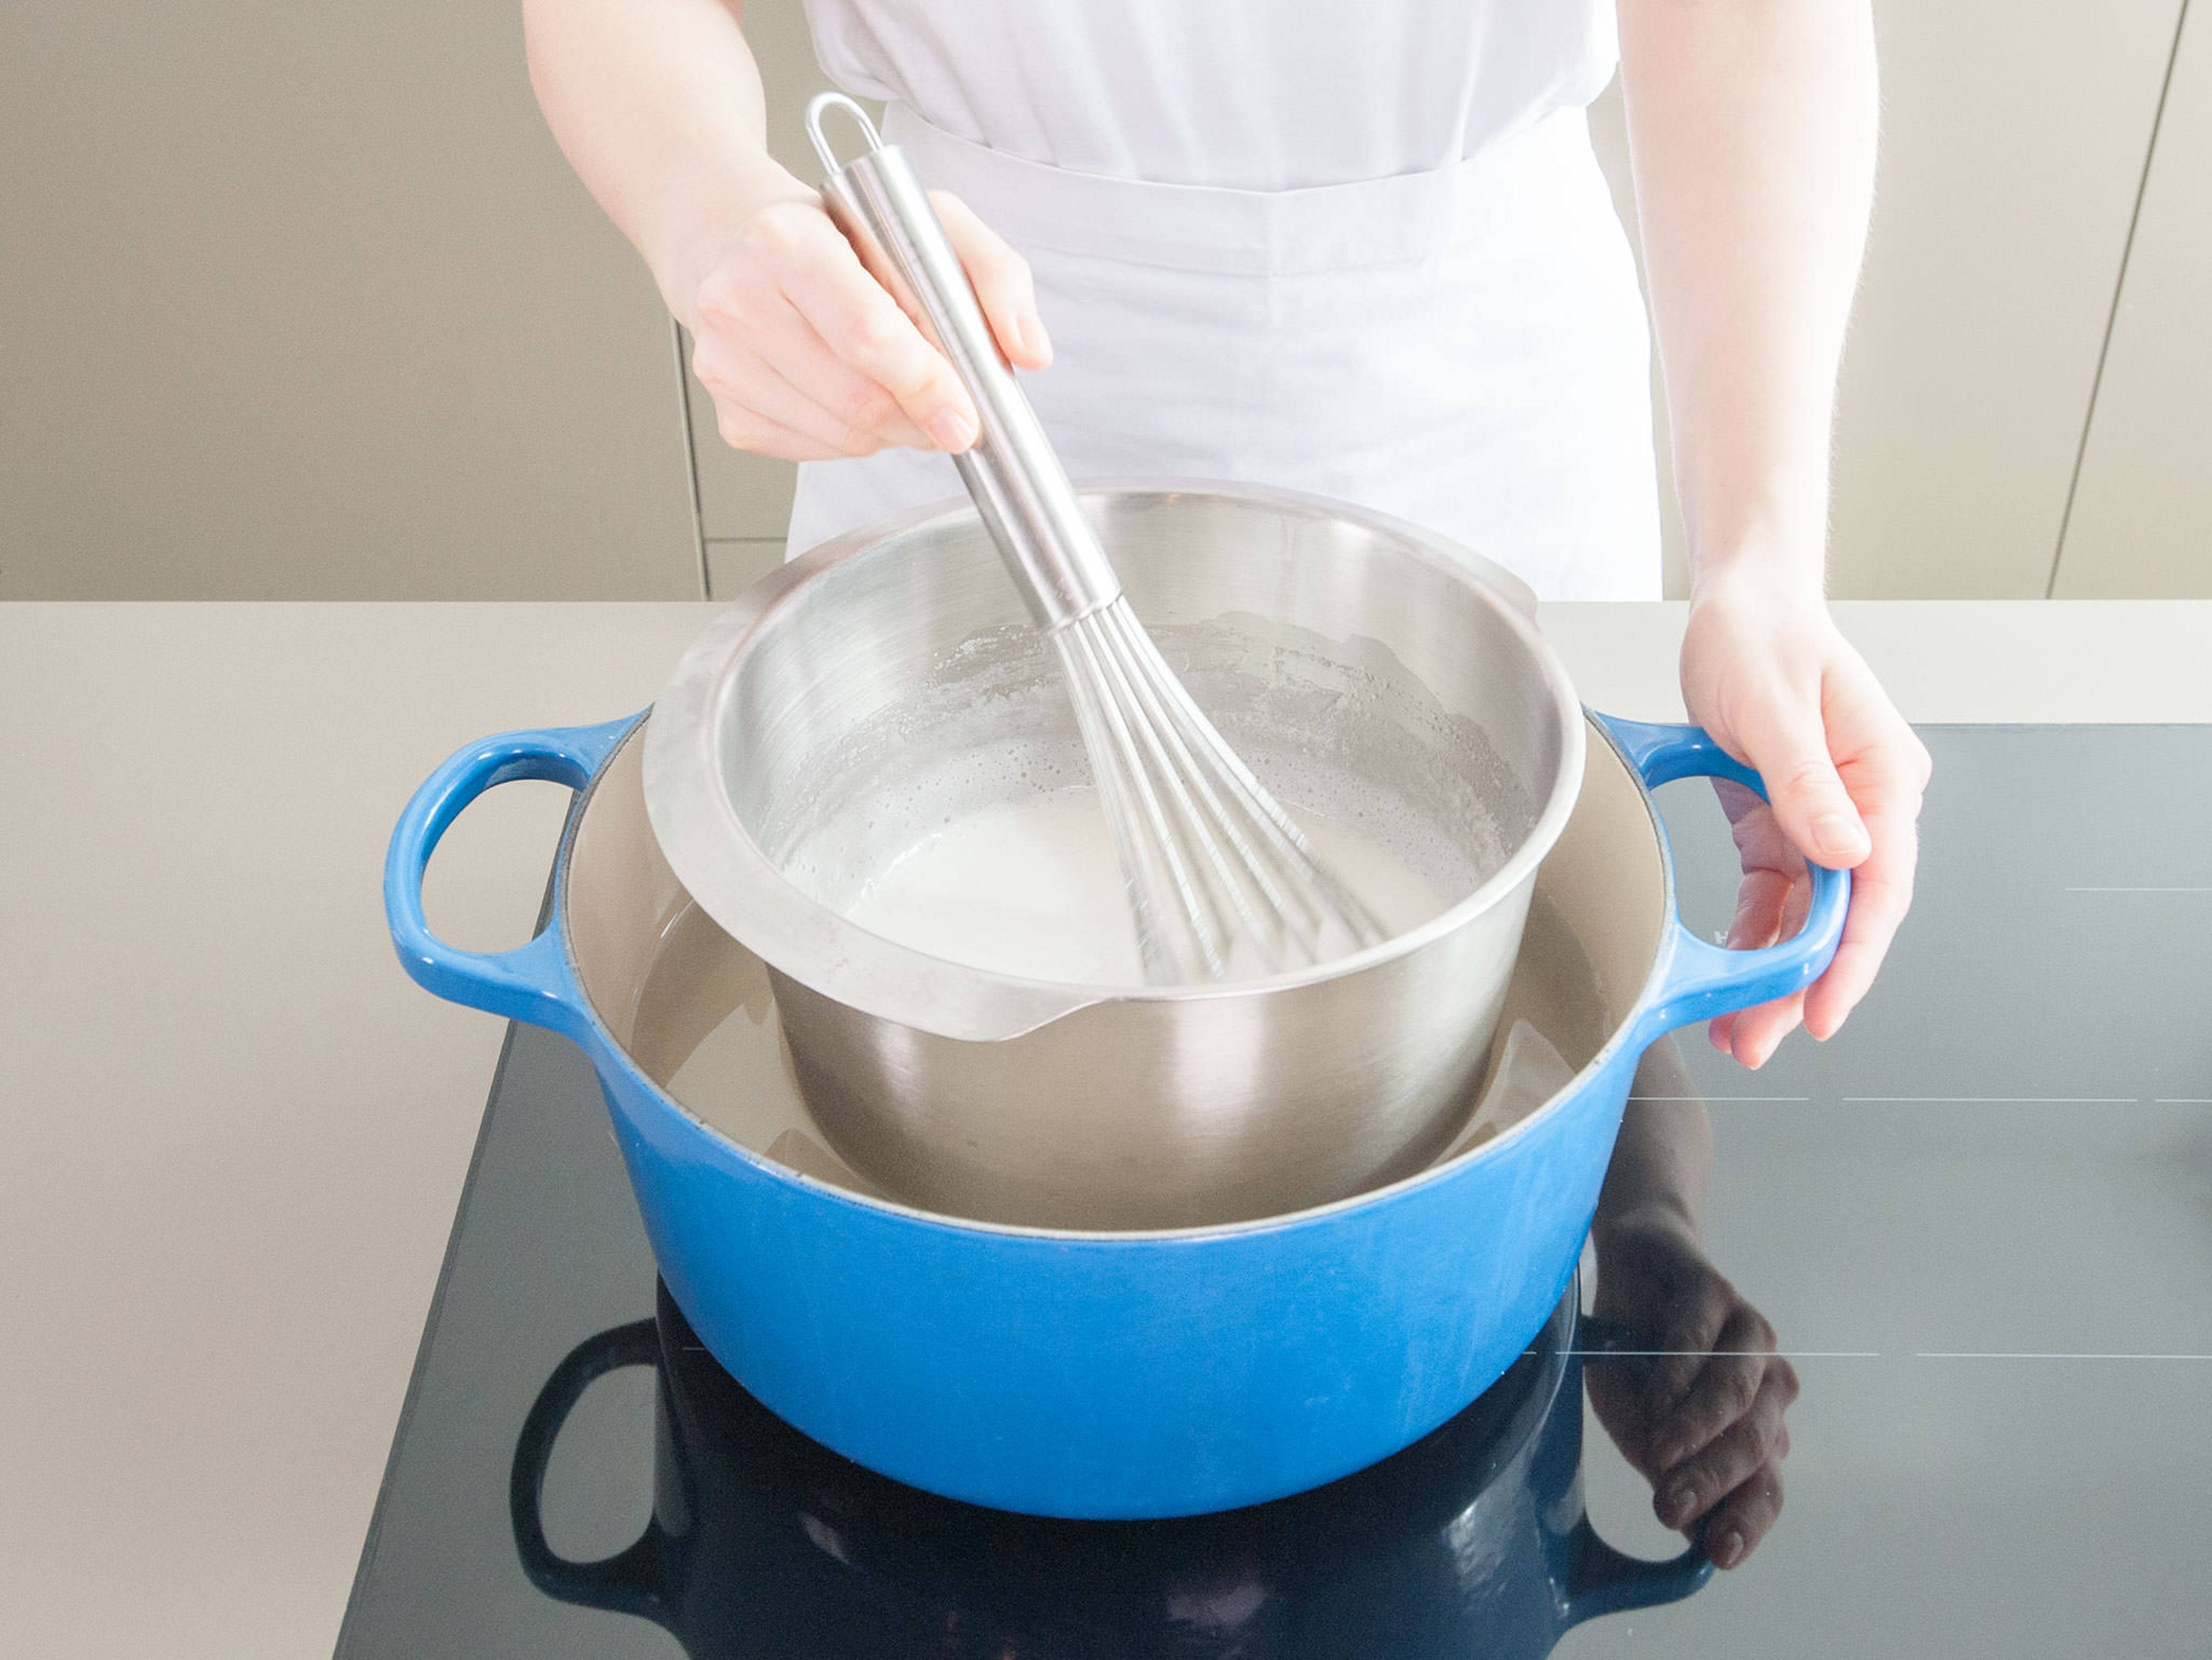 To make buttercream, fill pot with a few inches of water and bring to a slow simmer. In heat proof bowl or bowl of stand mixer, combine egg whites and sugar. Place bowl over pot of simmering water. Heat mixture, stirring constantly, until the mixture reaches 70°C/160°F or the sugar is completely dissolved. Transfer bowl to stand mixer or use hand mixer to beat egg whites, gradually increasing speed, until they form stiff peaks and bowl and meringue have cooled to the touch. With mixer running, add vanilla, then add butter gradually, until all is incorporated and buttercream is light and smooth. This can take time; continue to beat until it comes together. Make the buttercream recipe one more time. Store in airtight container if not using immediately, though fresh buttercream is best for decorating.